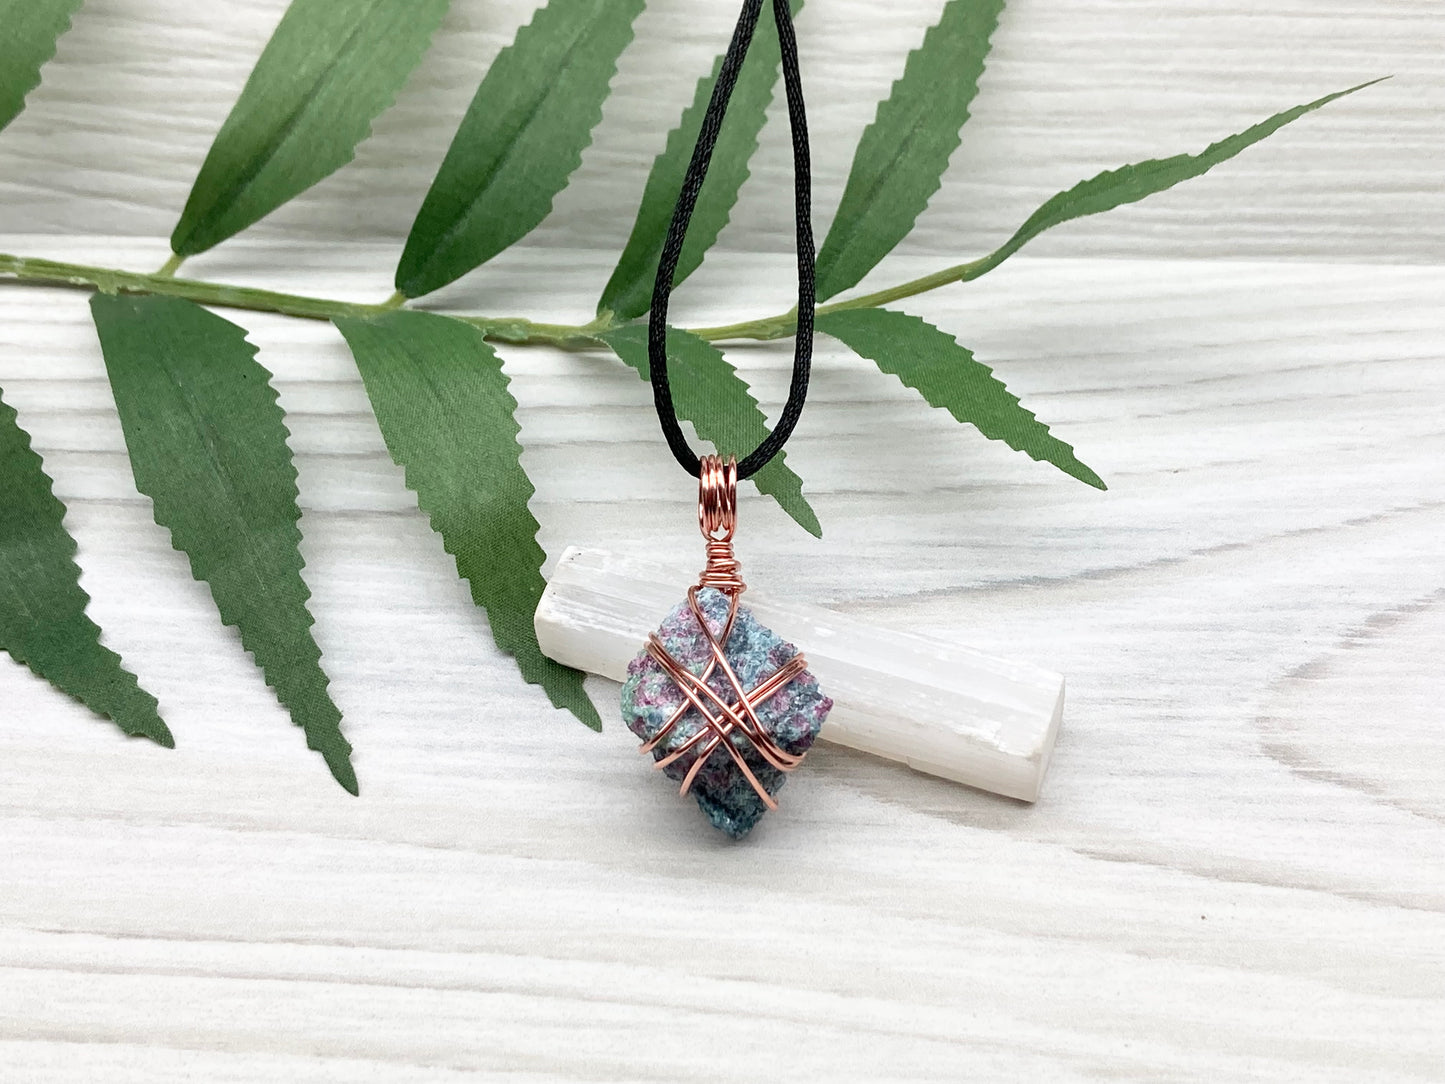 Rough Raw Ruby Zoisite Necklace. This Ruby Zoisite Crystal Is Hand Wrapped With Pure Copper Wire. This Stone is Blue and Red Colored. Gemstone Comes On A Black Chain. Spiritual New Age Style Unisex Jewelry.